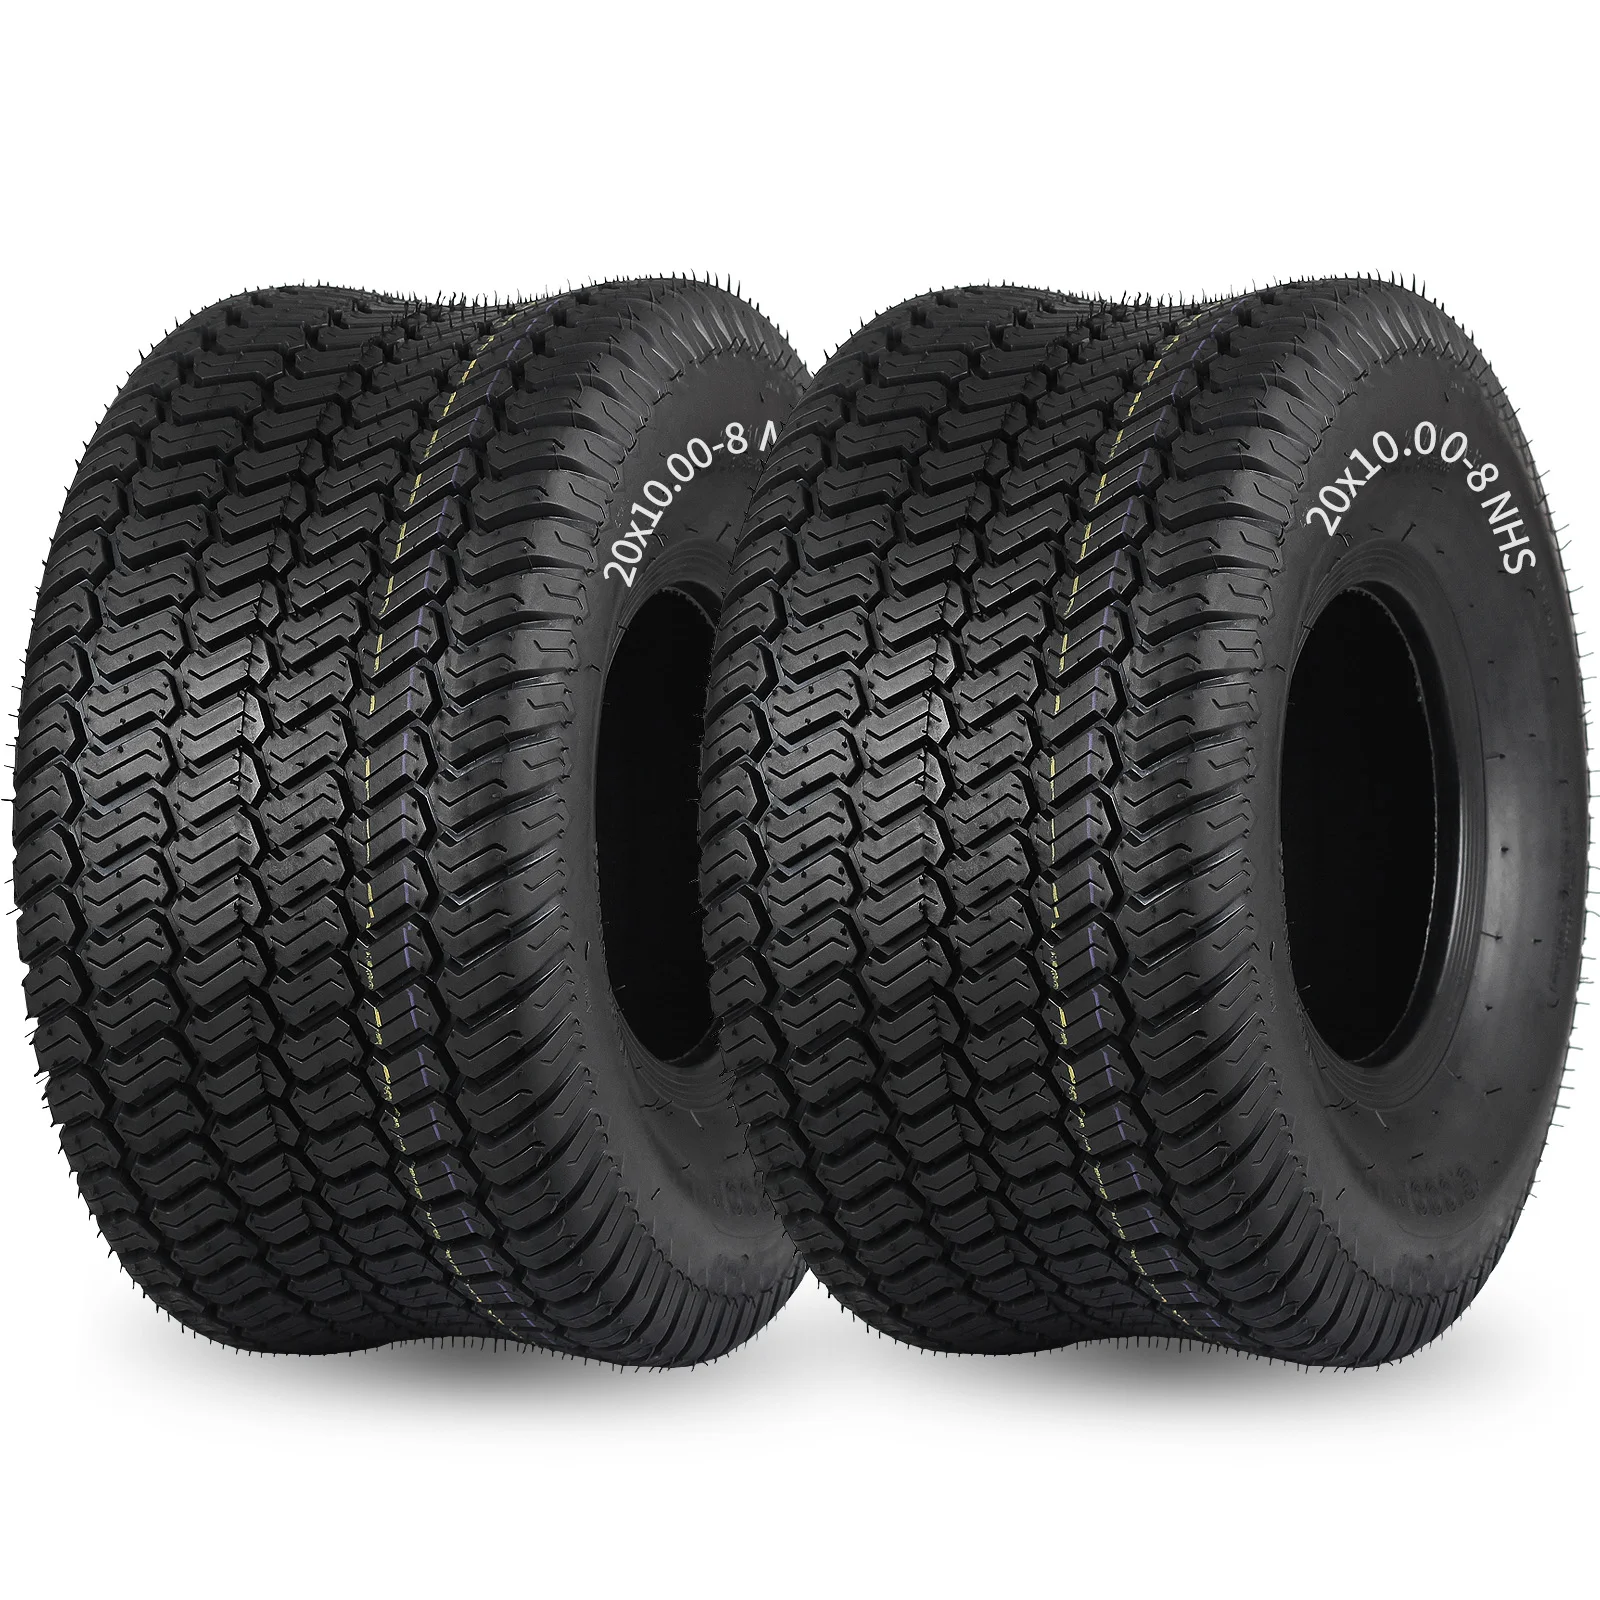 20 x 10.00-8 Turf-S Pattern Lawnmower Tubeless Turf Tire, 20x10-8 for Tractor Riding Lawnmowers, 4 Ply